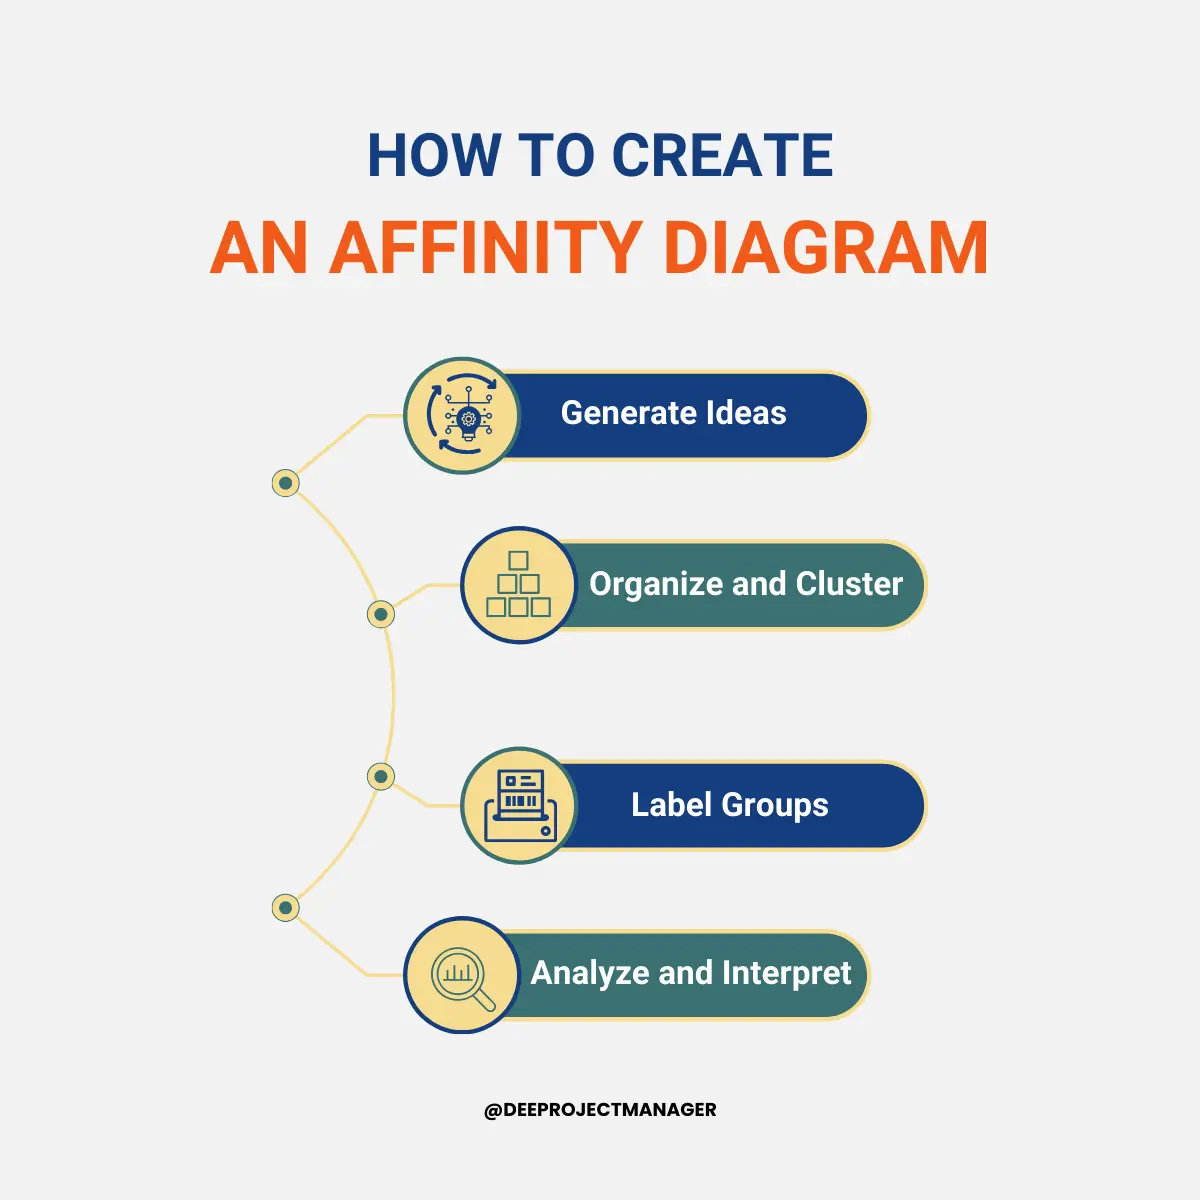 How to Create an Affinity Diagram